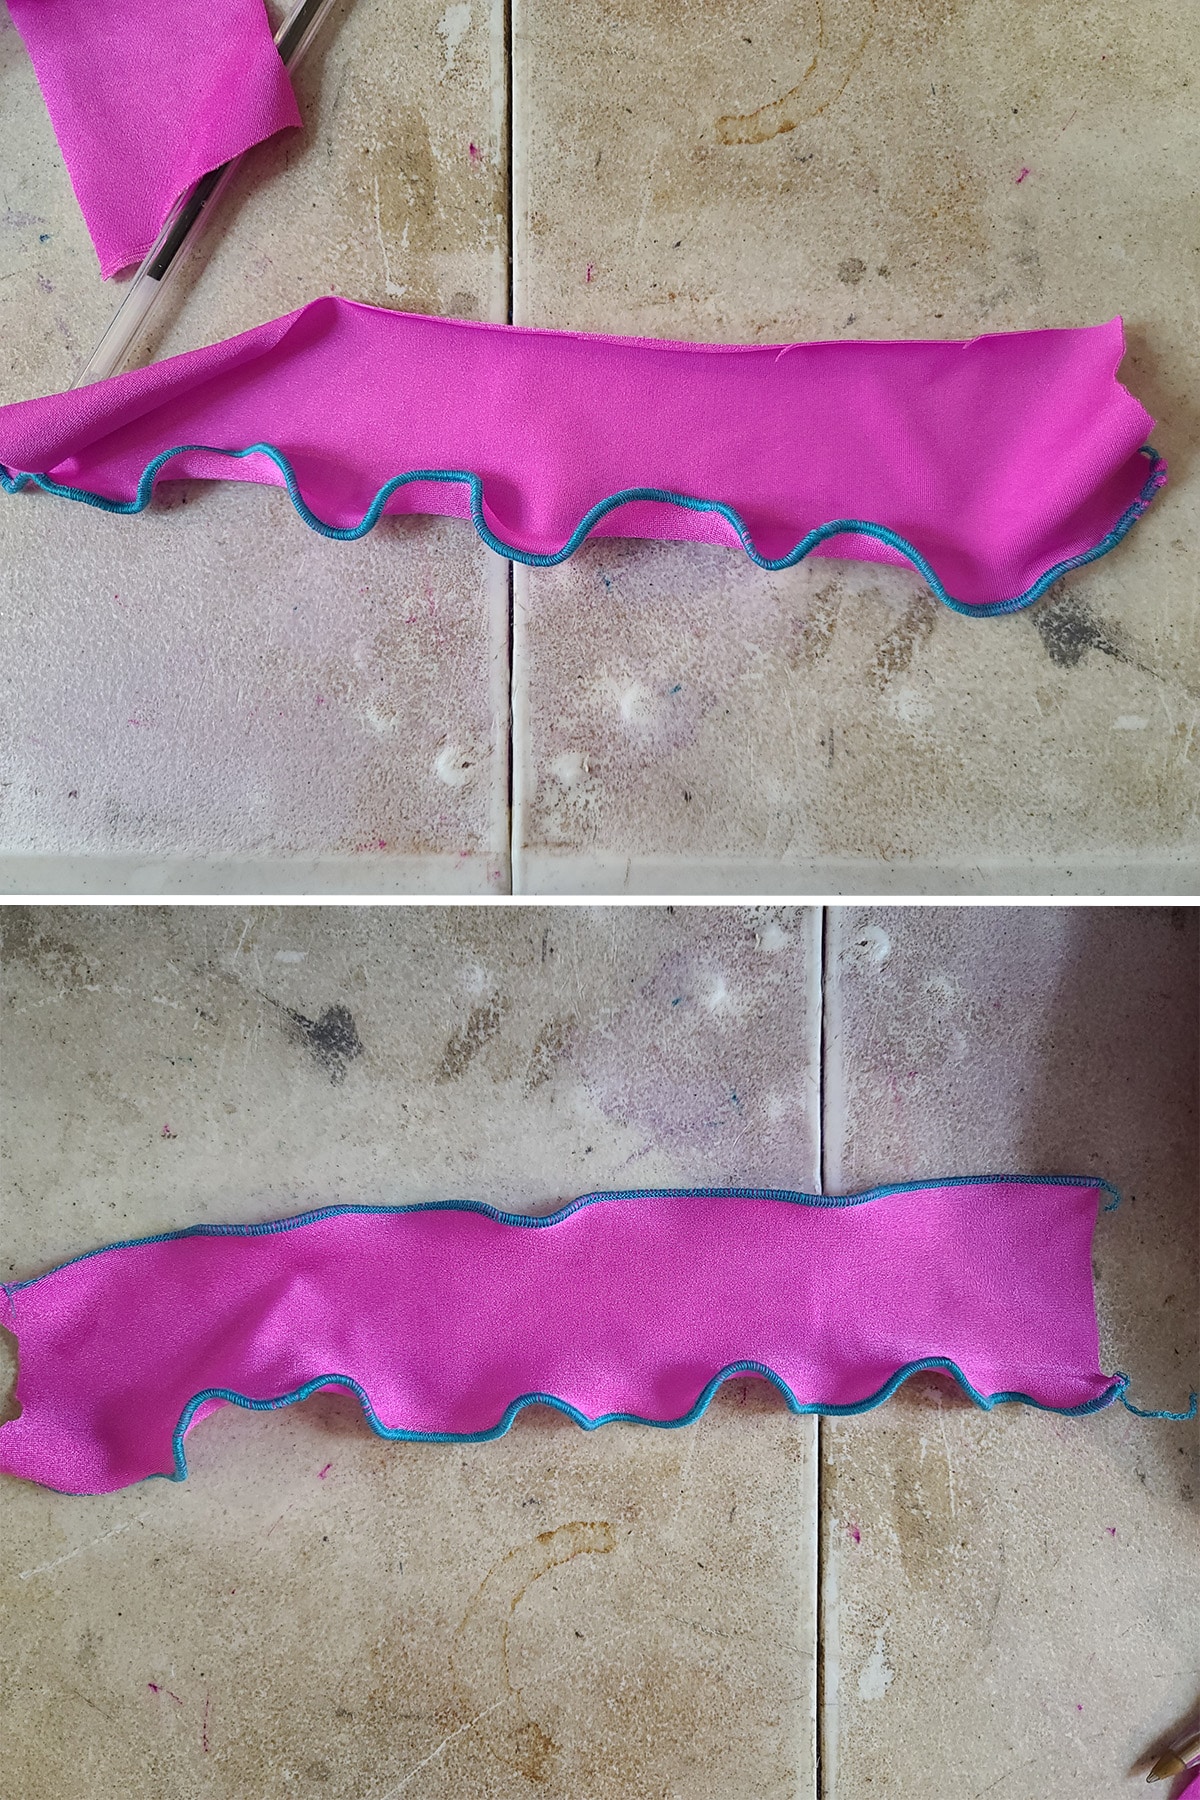 A 2 part mage of a strip of pink spandex. The top edge is less ruffly than the bottom edge.